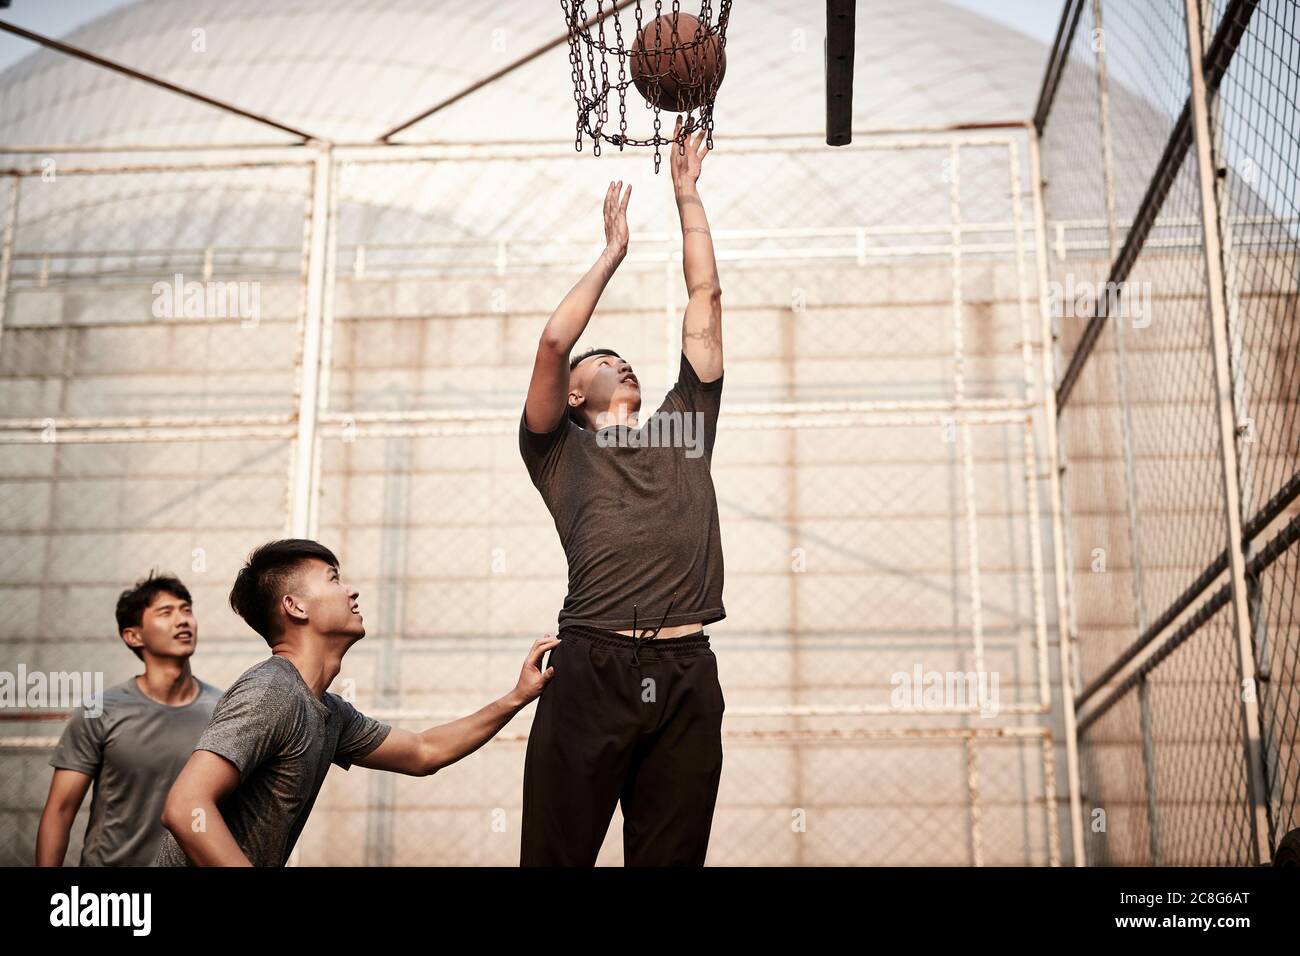 young asian adult men playing basketball on outdoor court Stock Photo